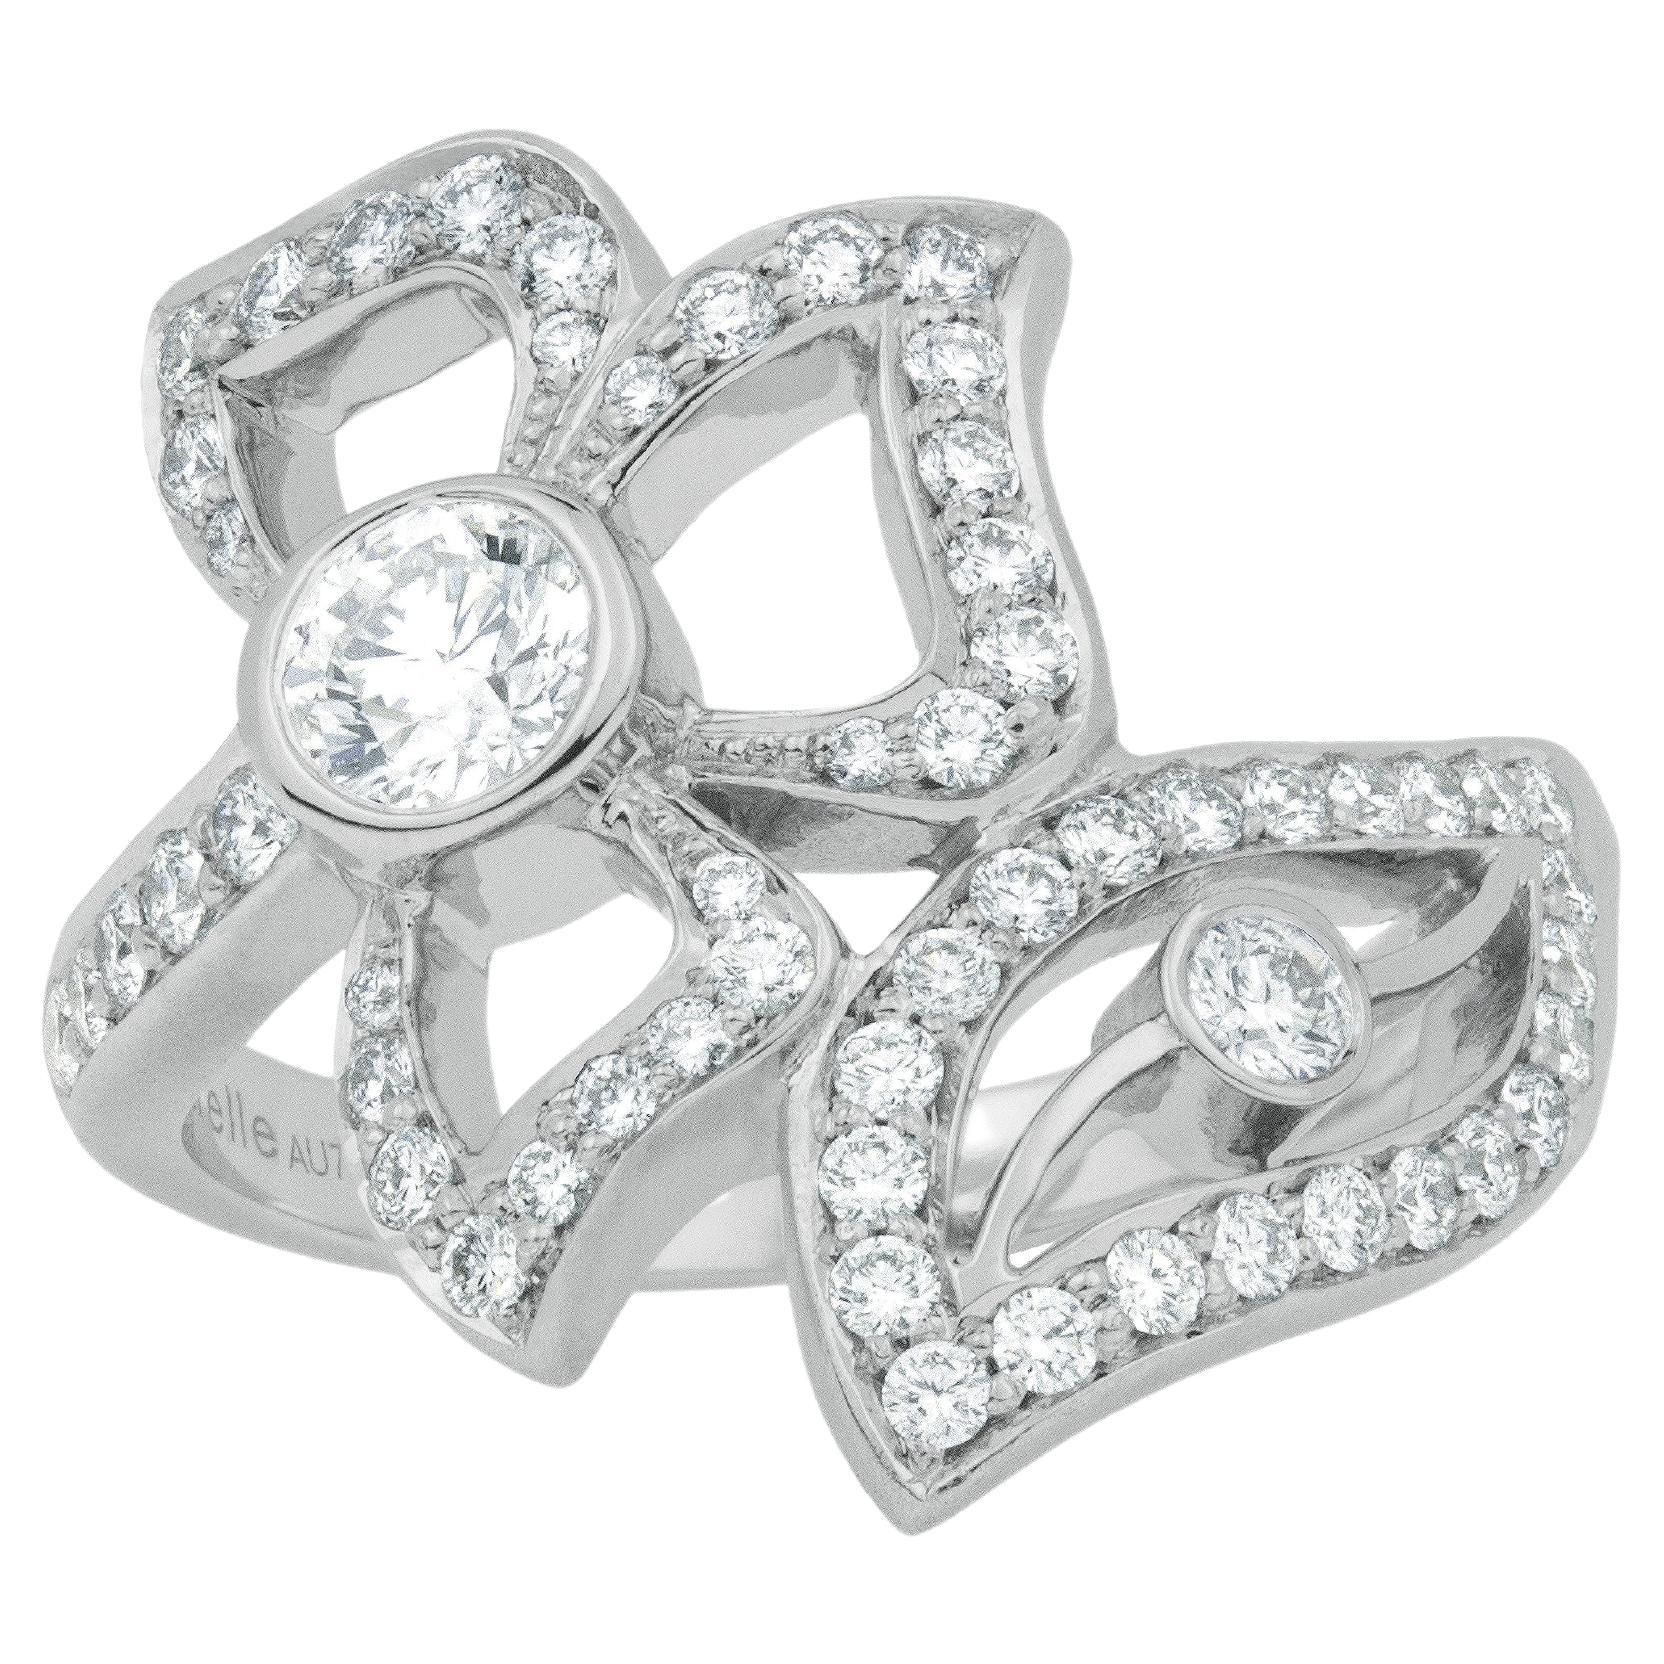 LOUIS VUITTON, Ardentes You and Me ring, white gold set with